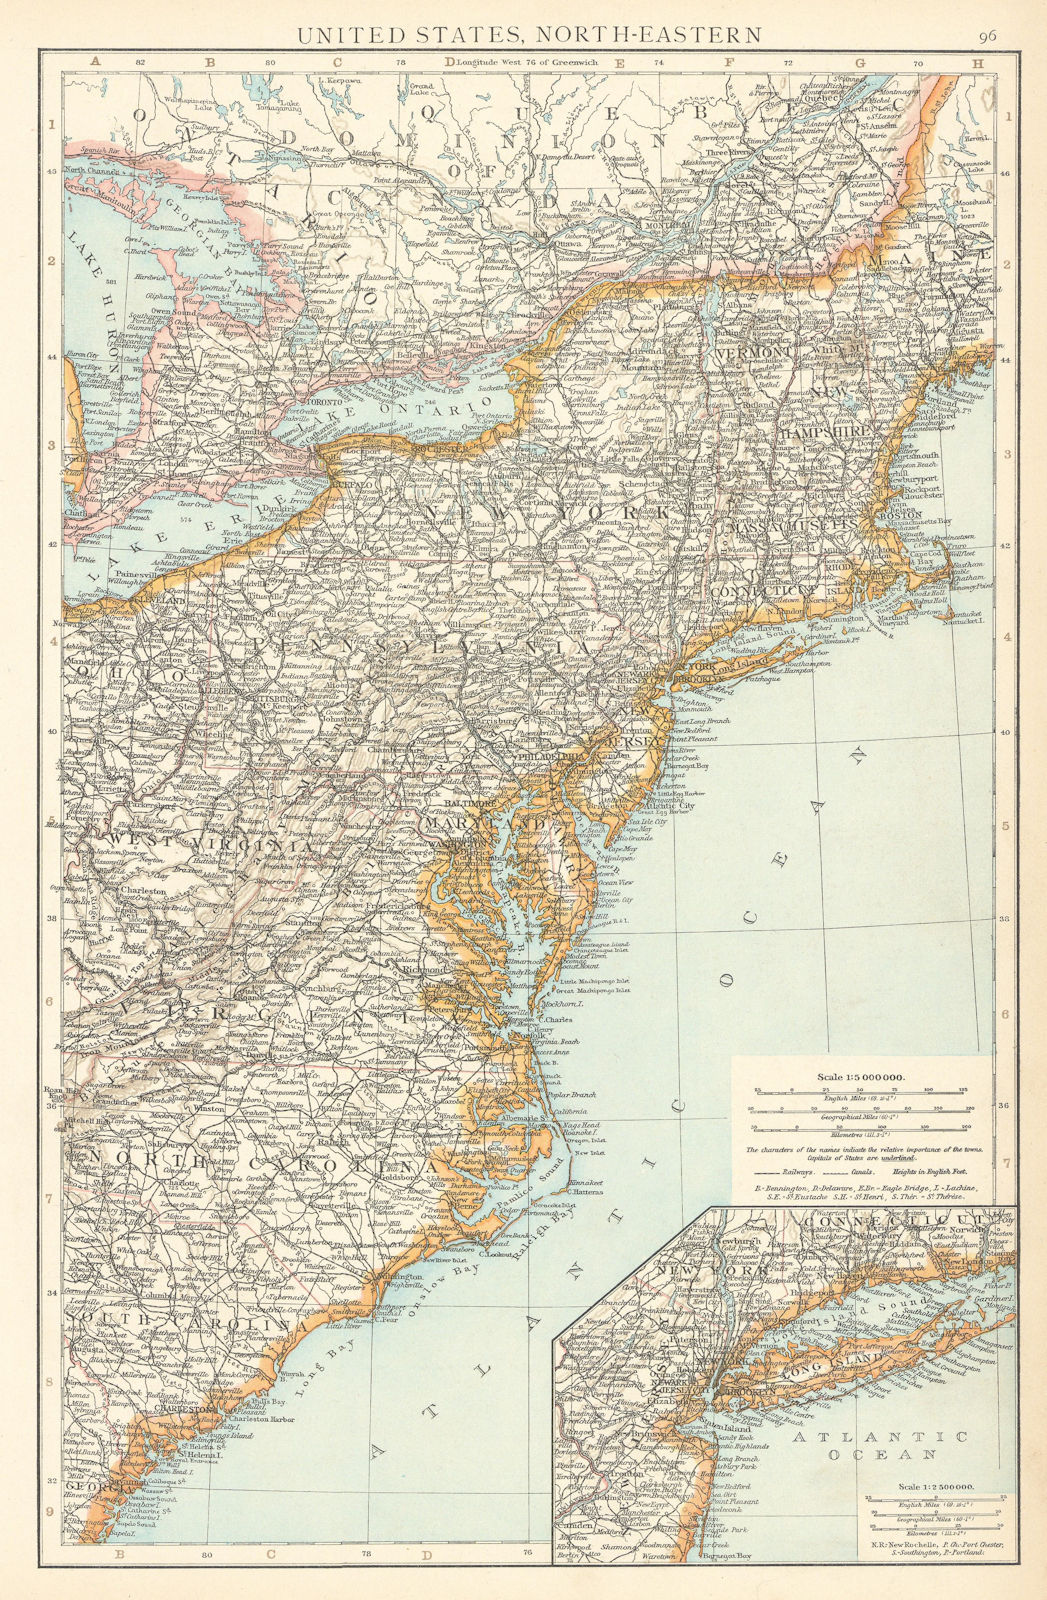 North-east United States. New England Atlantic Seaboard. TIMES 1895 old map